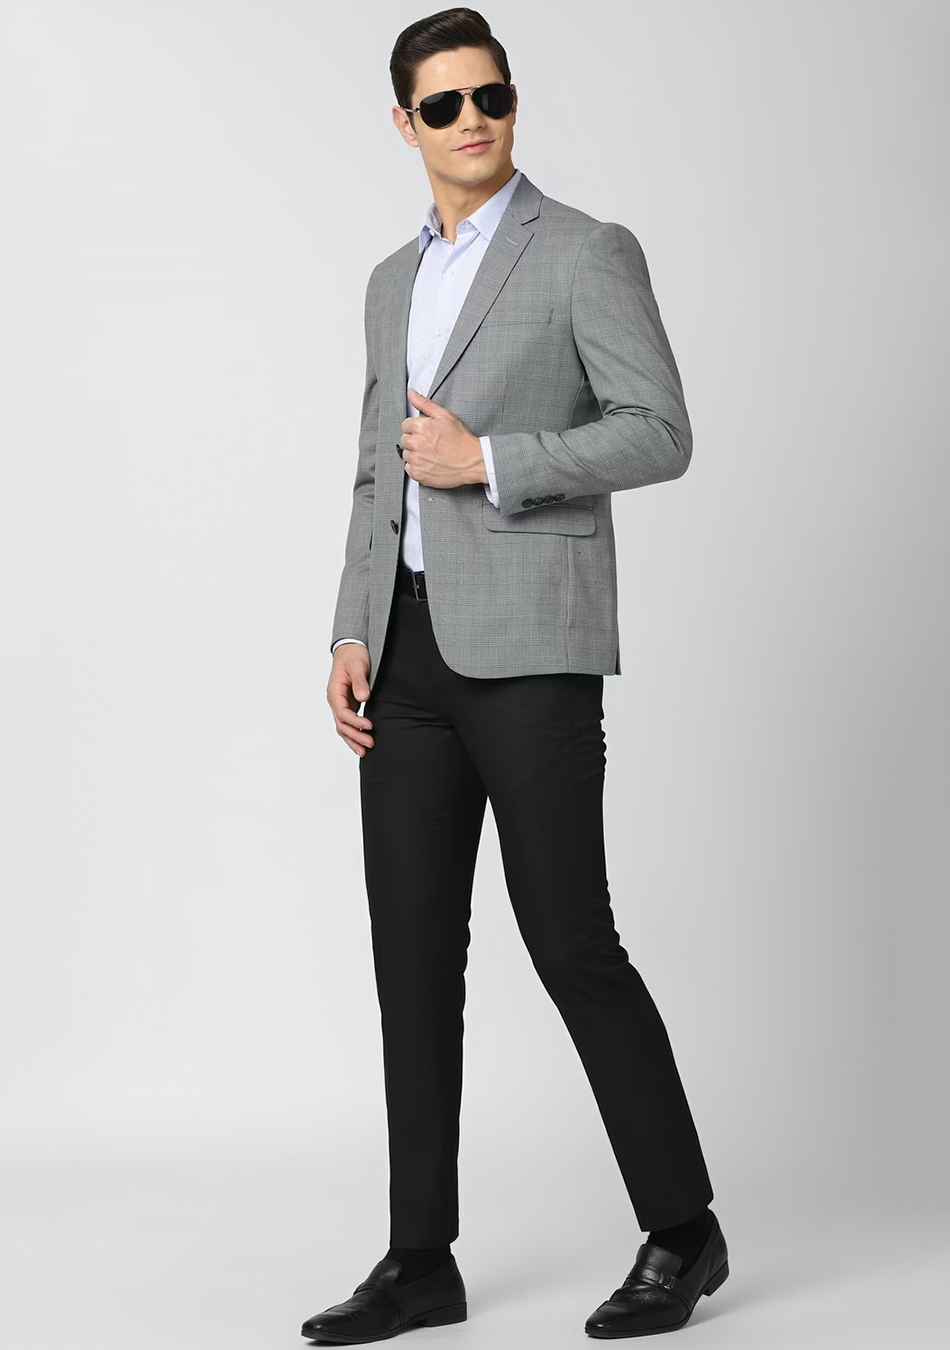 Guide: Basic Rules for Blazer and Chinos Combinations - Hockerty